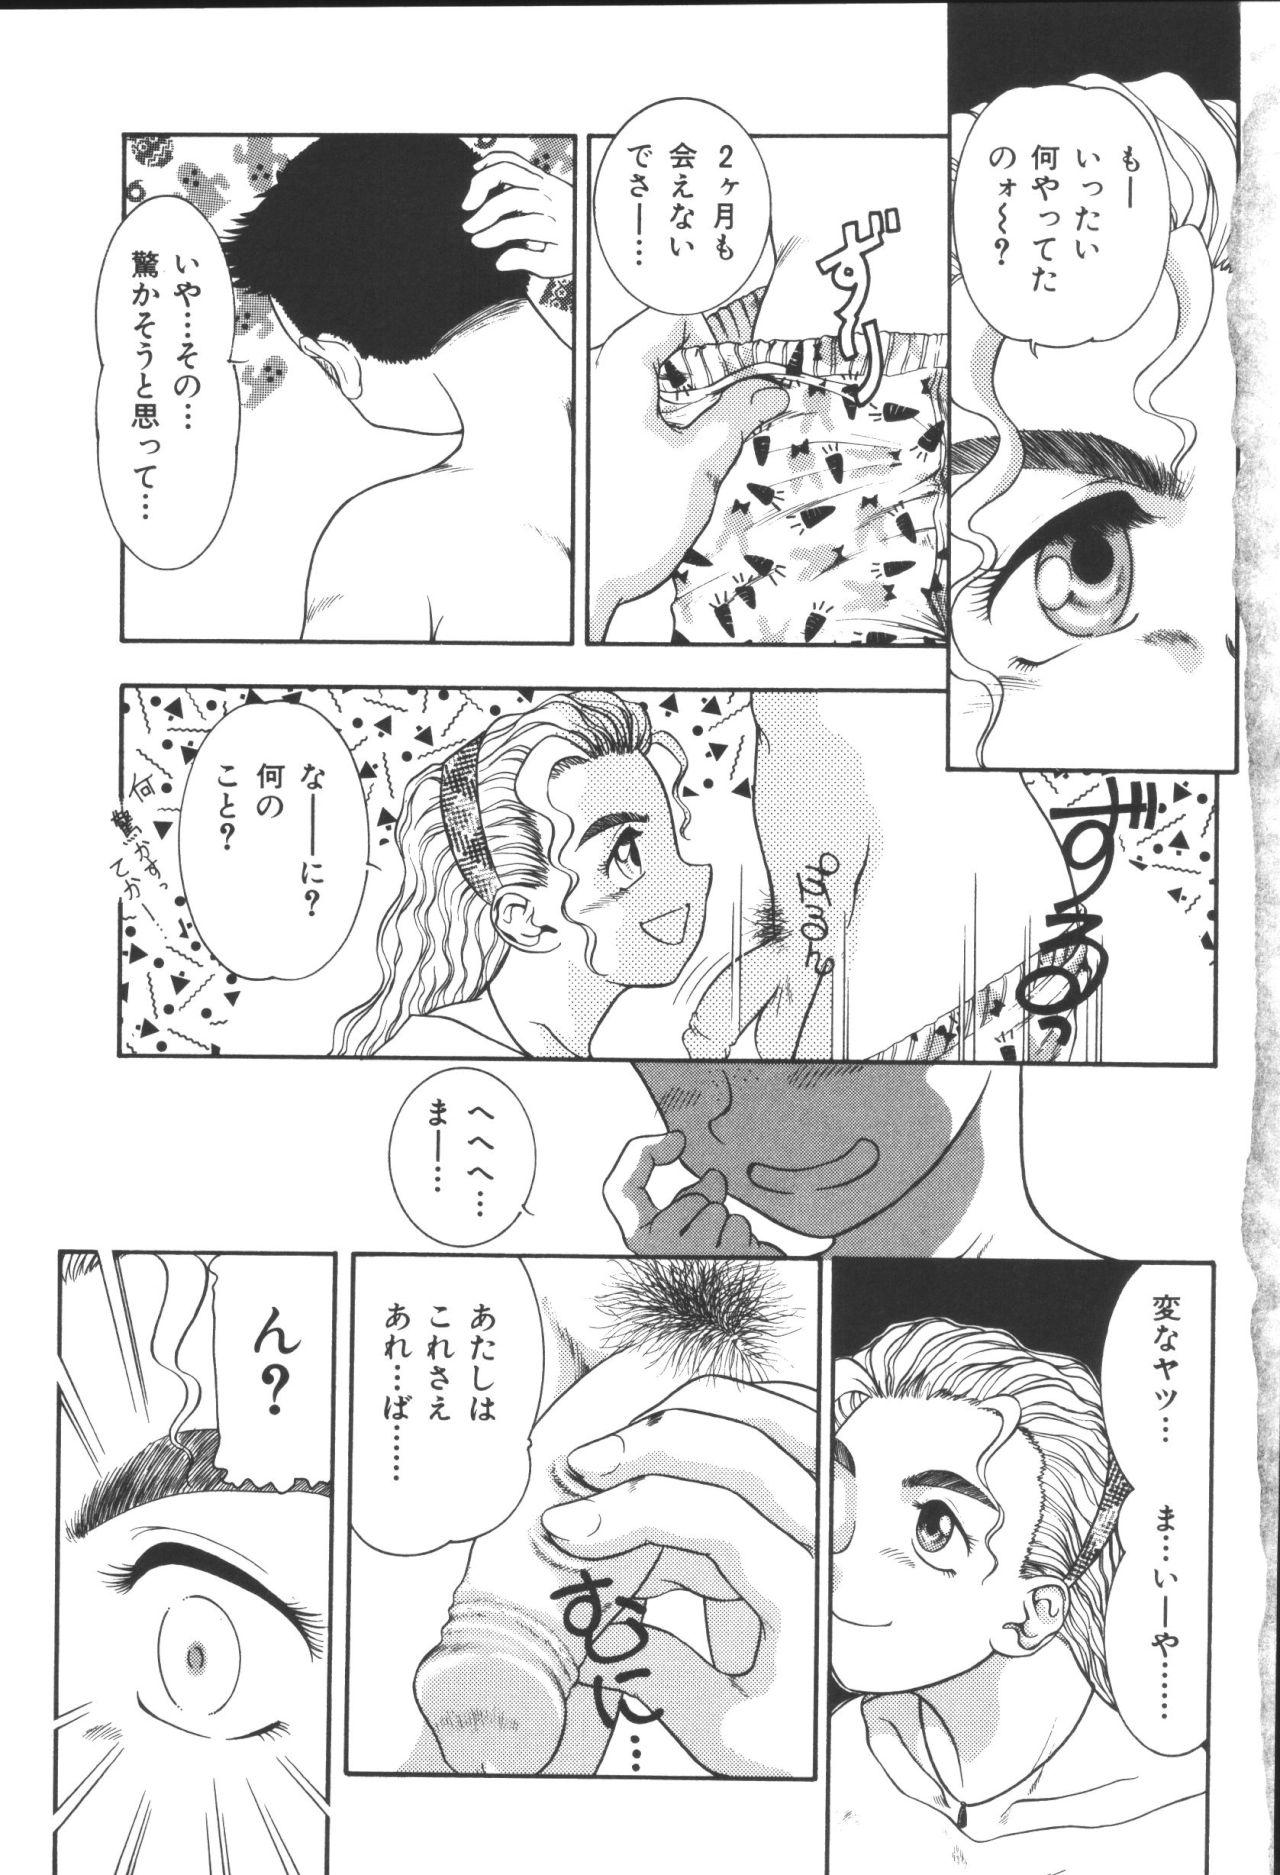 Friends Kyoudai Renka Old Vs Young - Page 7